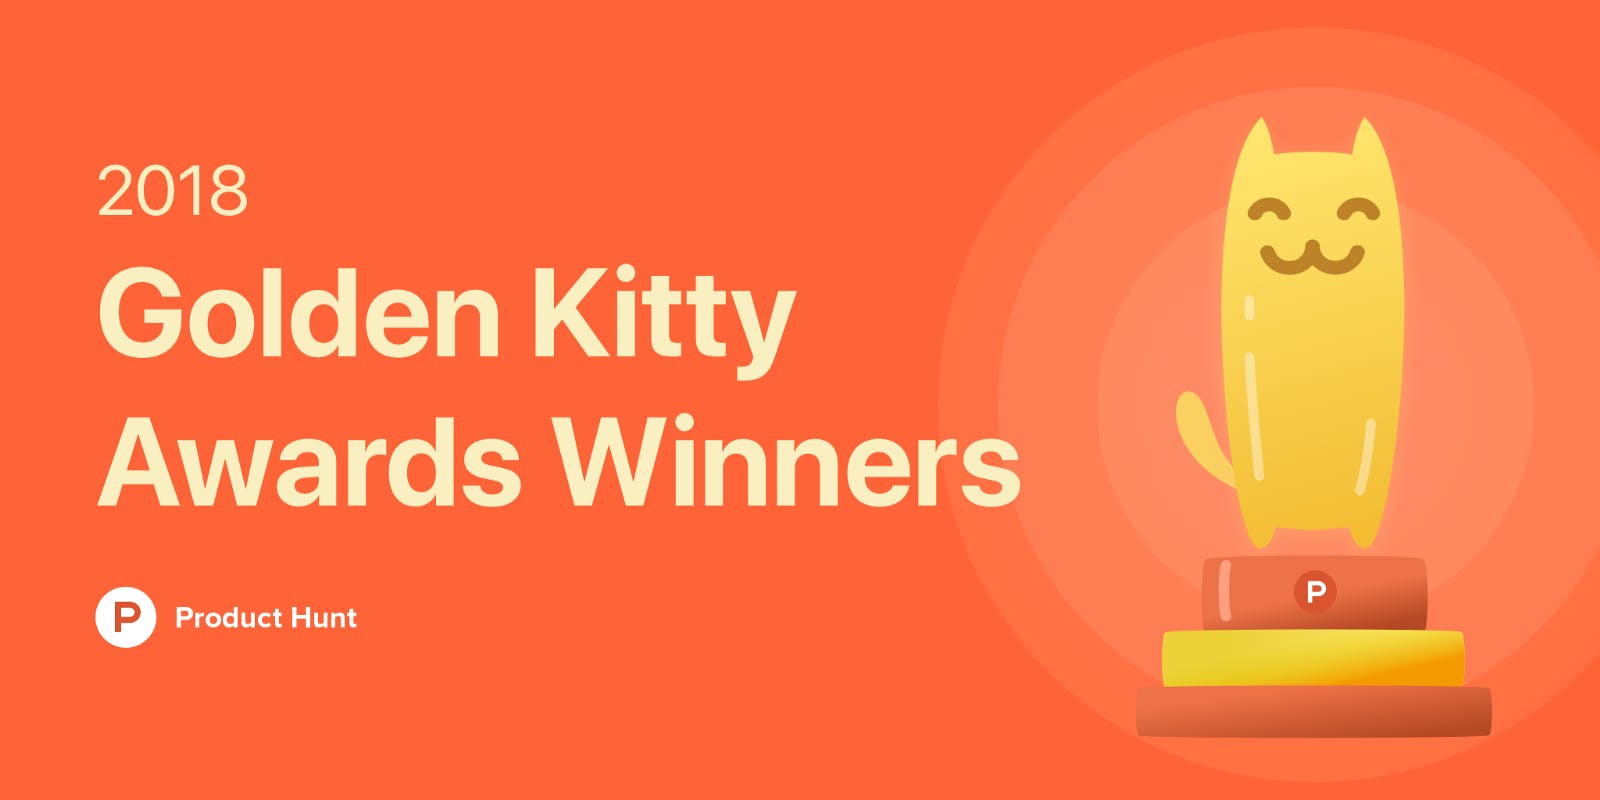 /what-winning-second-place-in-the-golden-kitty-awards-taught-me-d08cdfadfc16 feature image